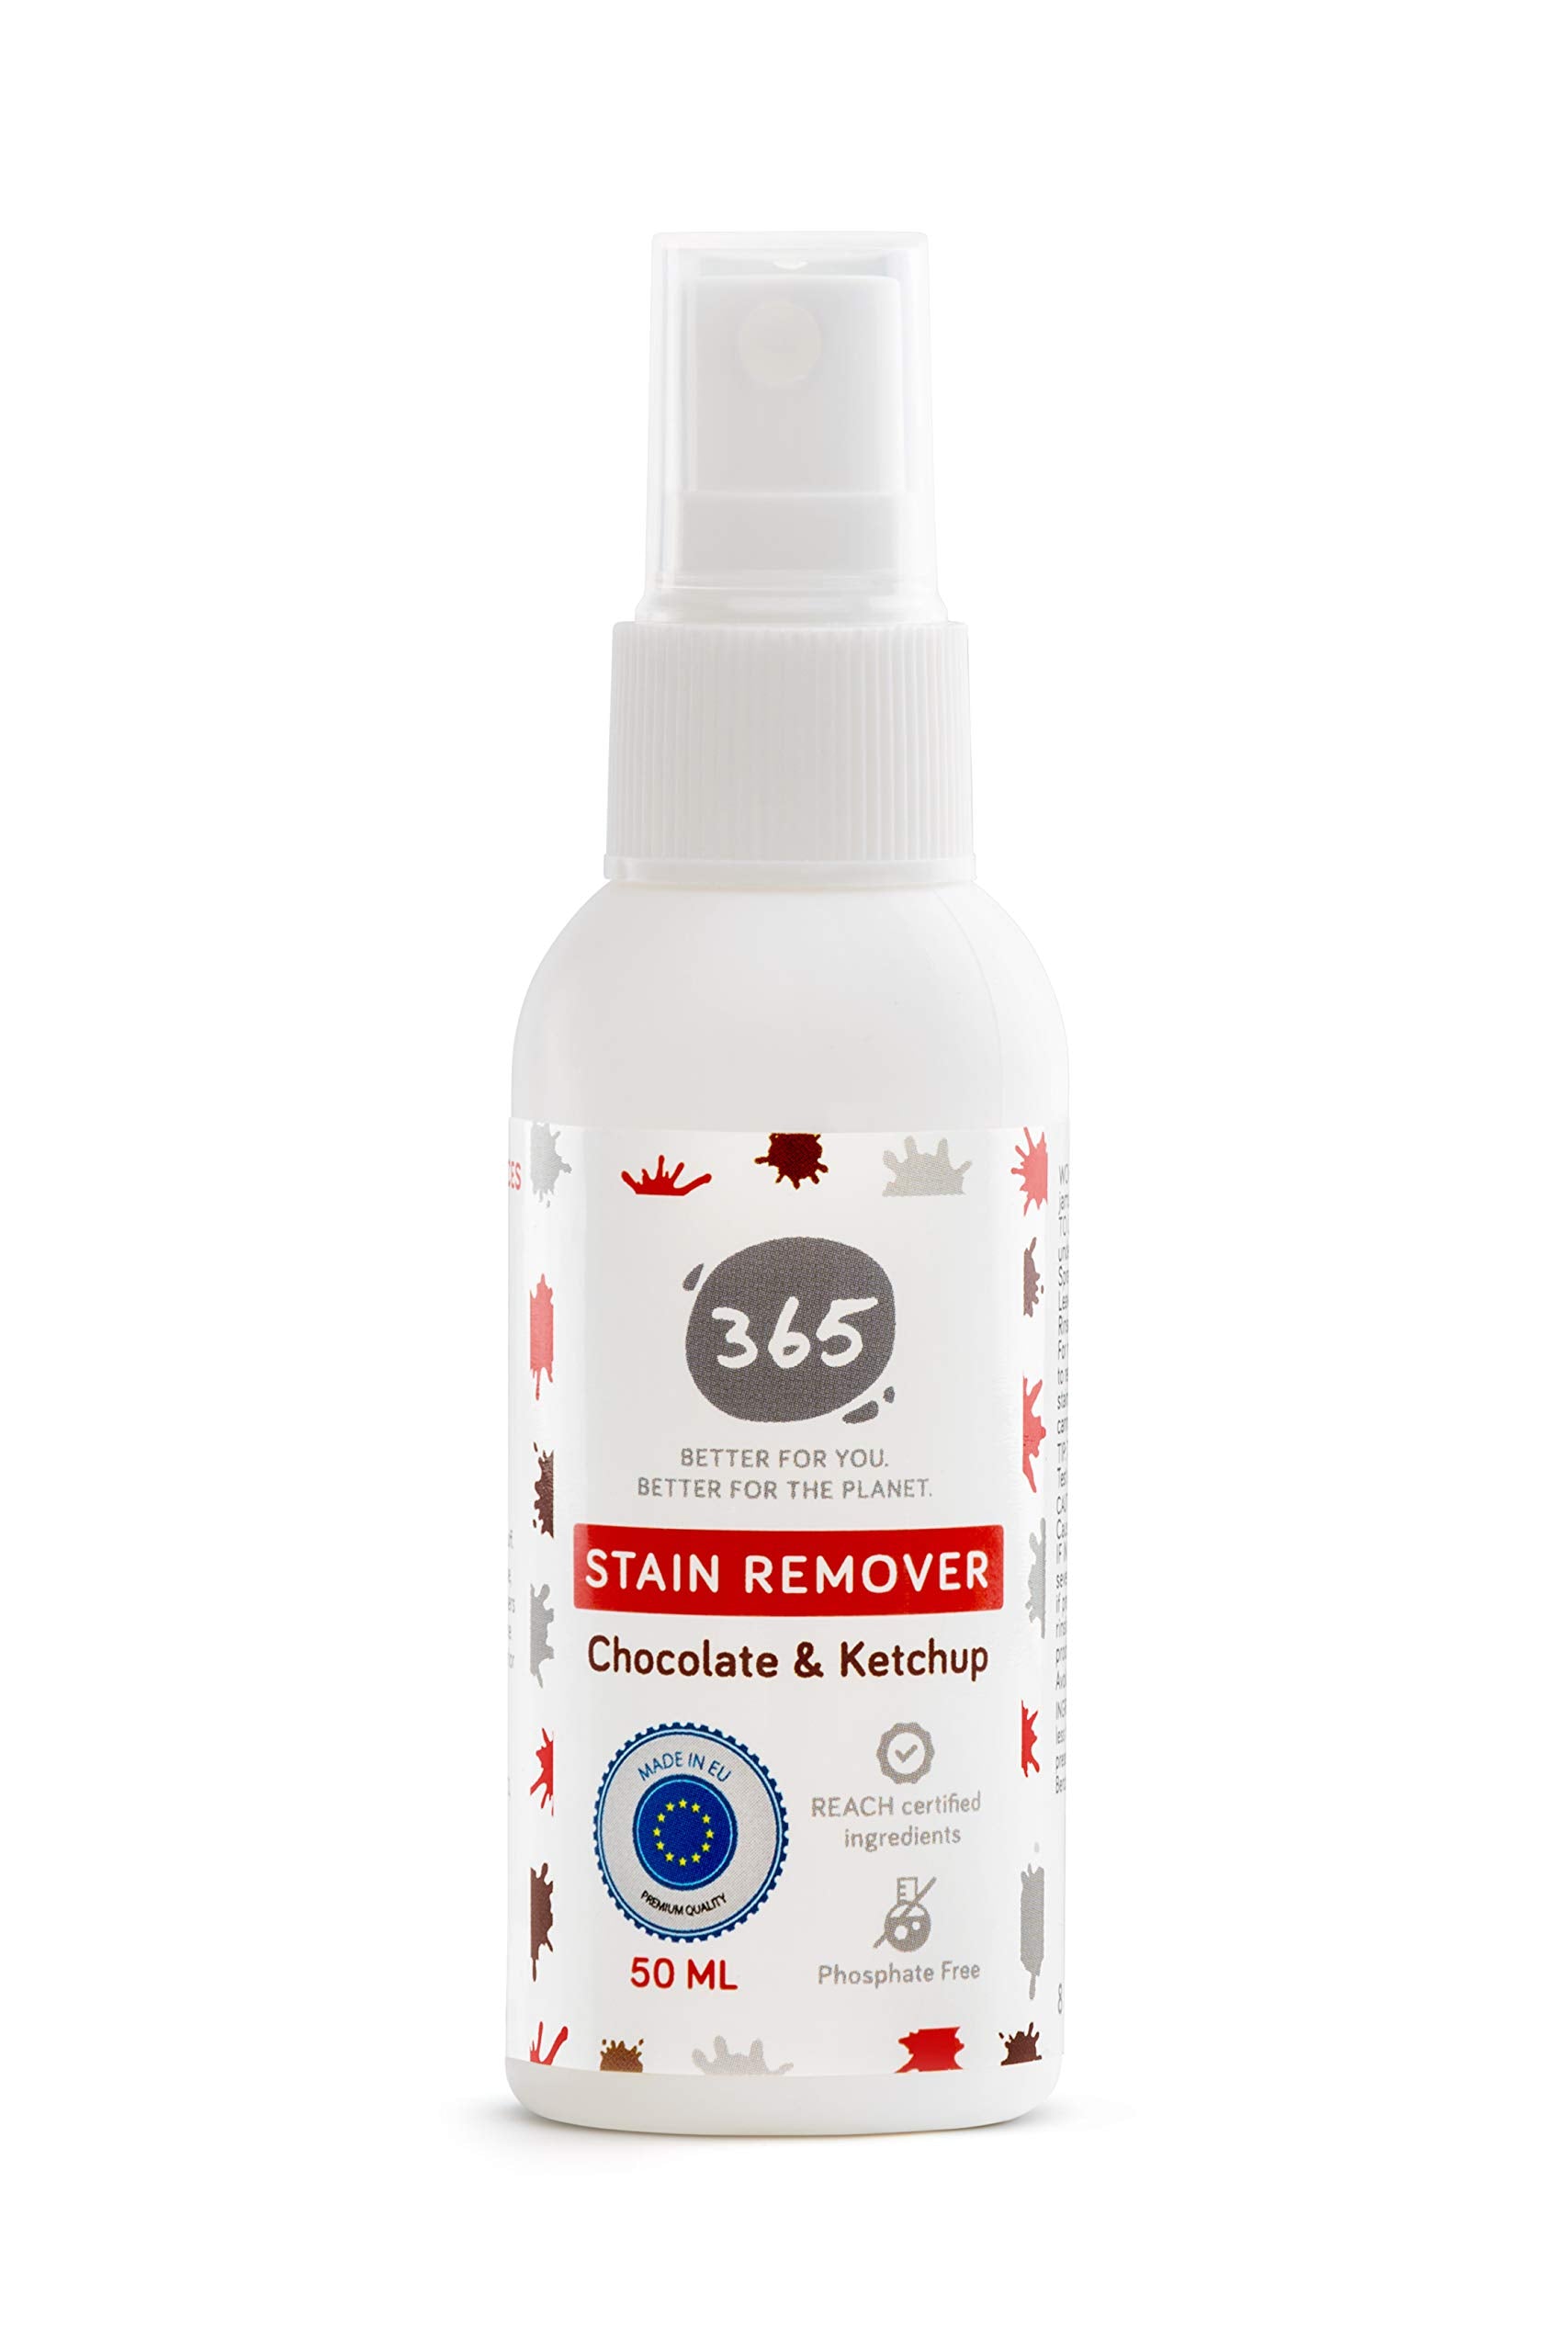 ABSORBIA 365 Stain Remover For Chocolate and Ketch up | Chocolate Stain Remover| Ketch up Stain Remover| To remove stain from Carpet,Upholstry, Clothing, Wall, Plastic and more in Spray Bottle 50ml…